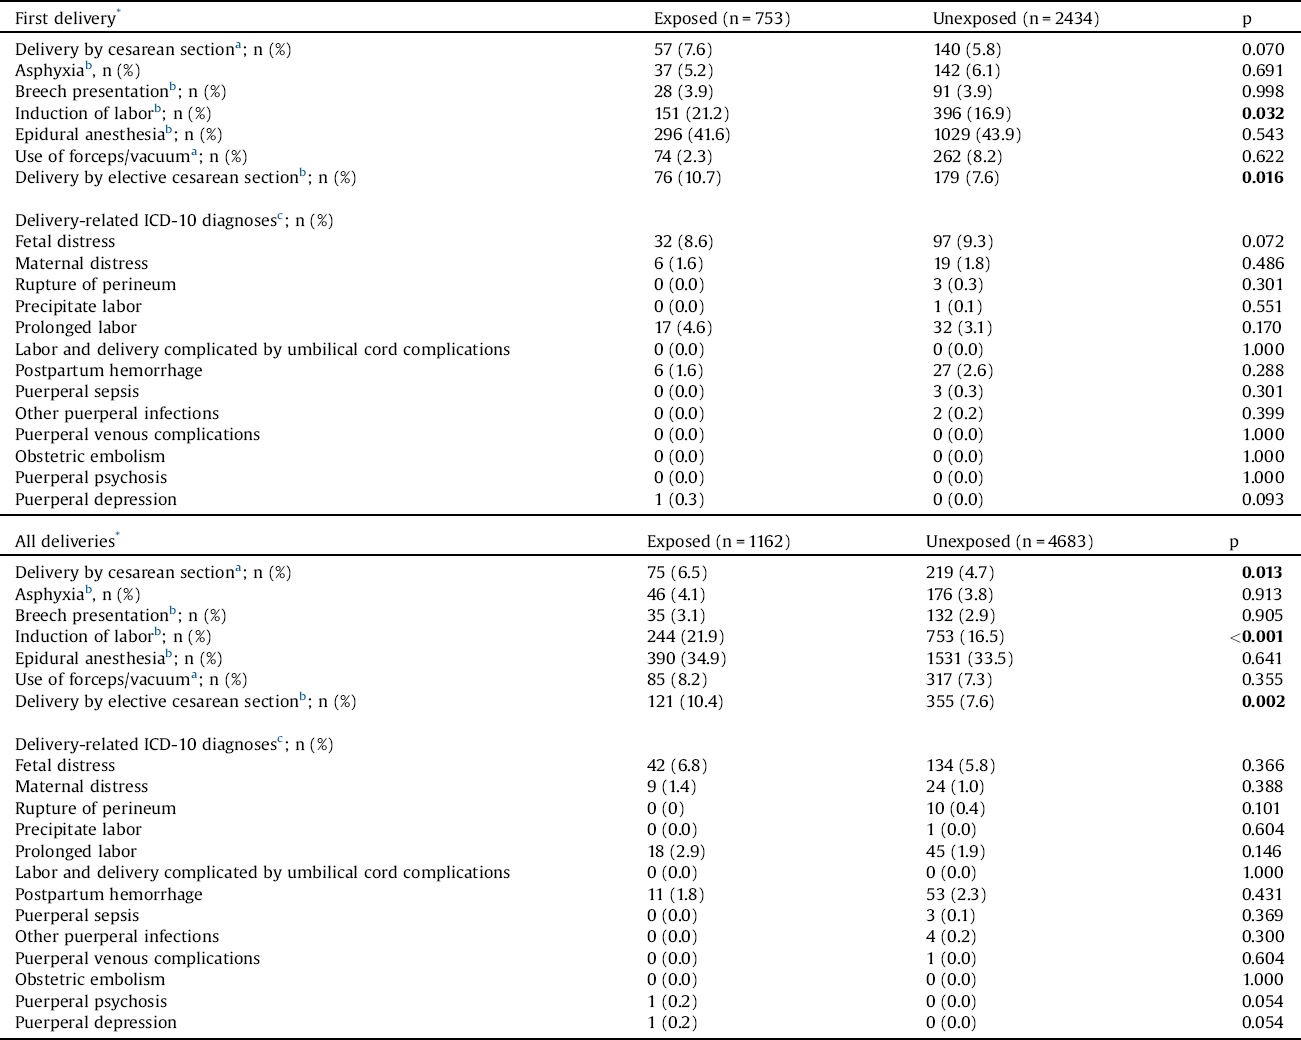 Obstetric And Perinatal Health Outcomes Related To Schizophrenia A National Register Based Follow Up Study Among Finnish Women Born Between 1965 And 1980 And Their Offspring European Psychiatry Cambridge Core